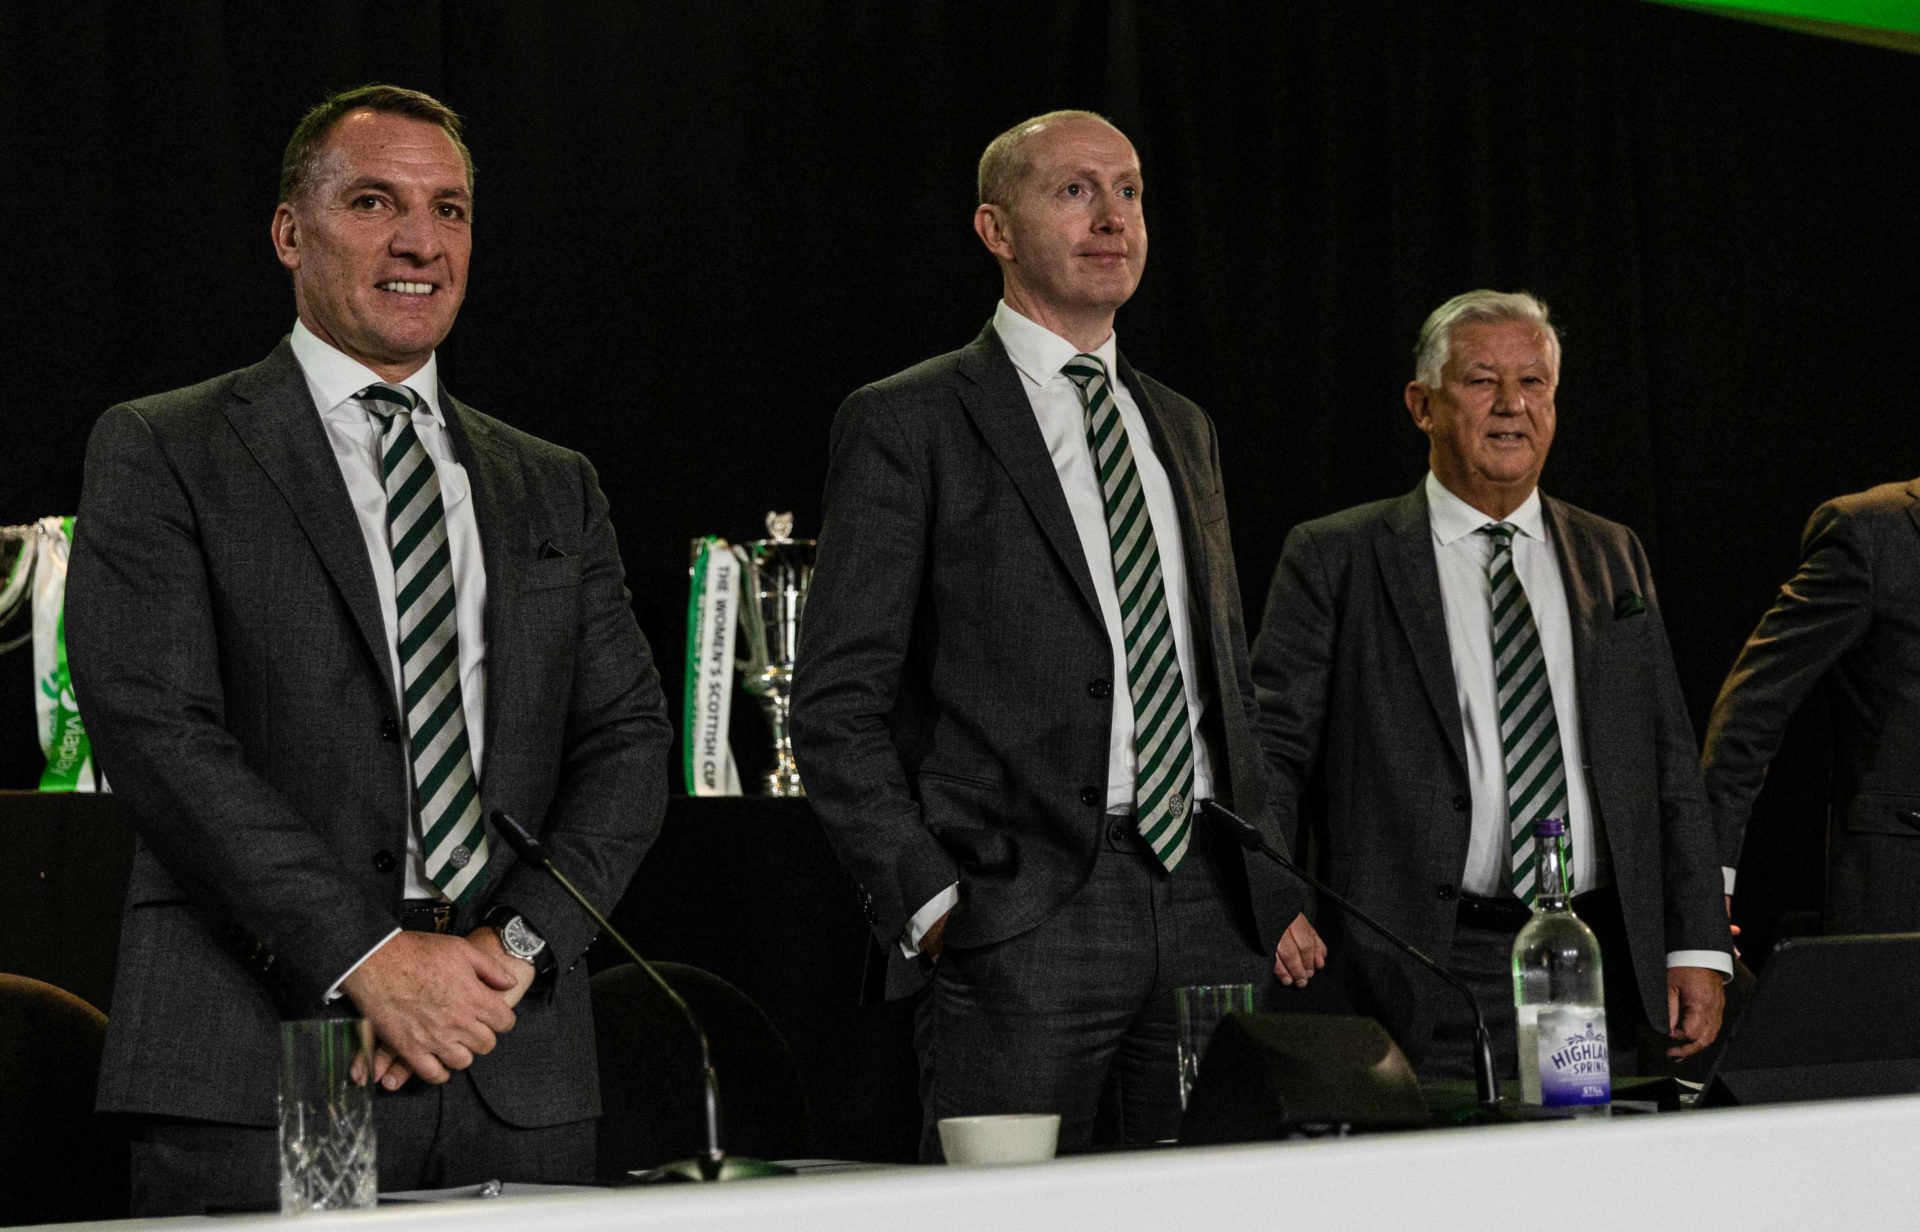 Celtic AGM: Green Brigade are ‘divisive and ban should be permanent’